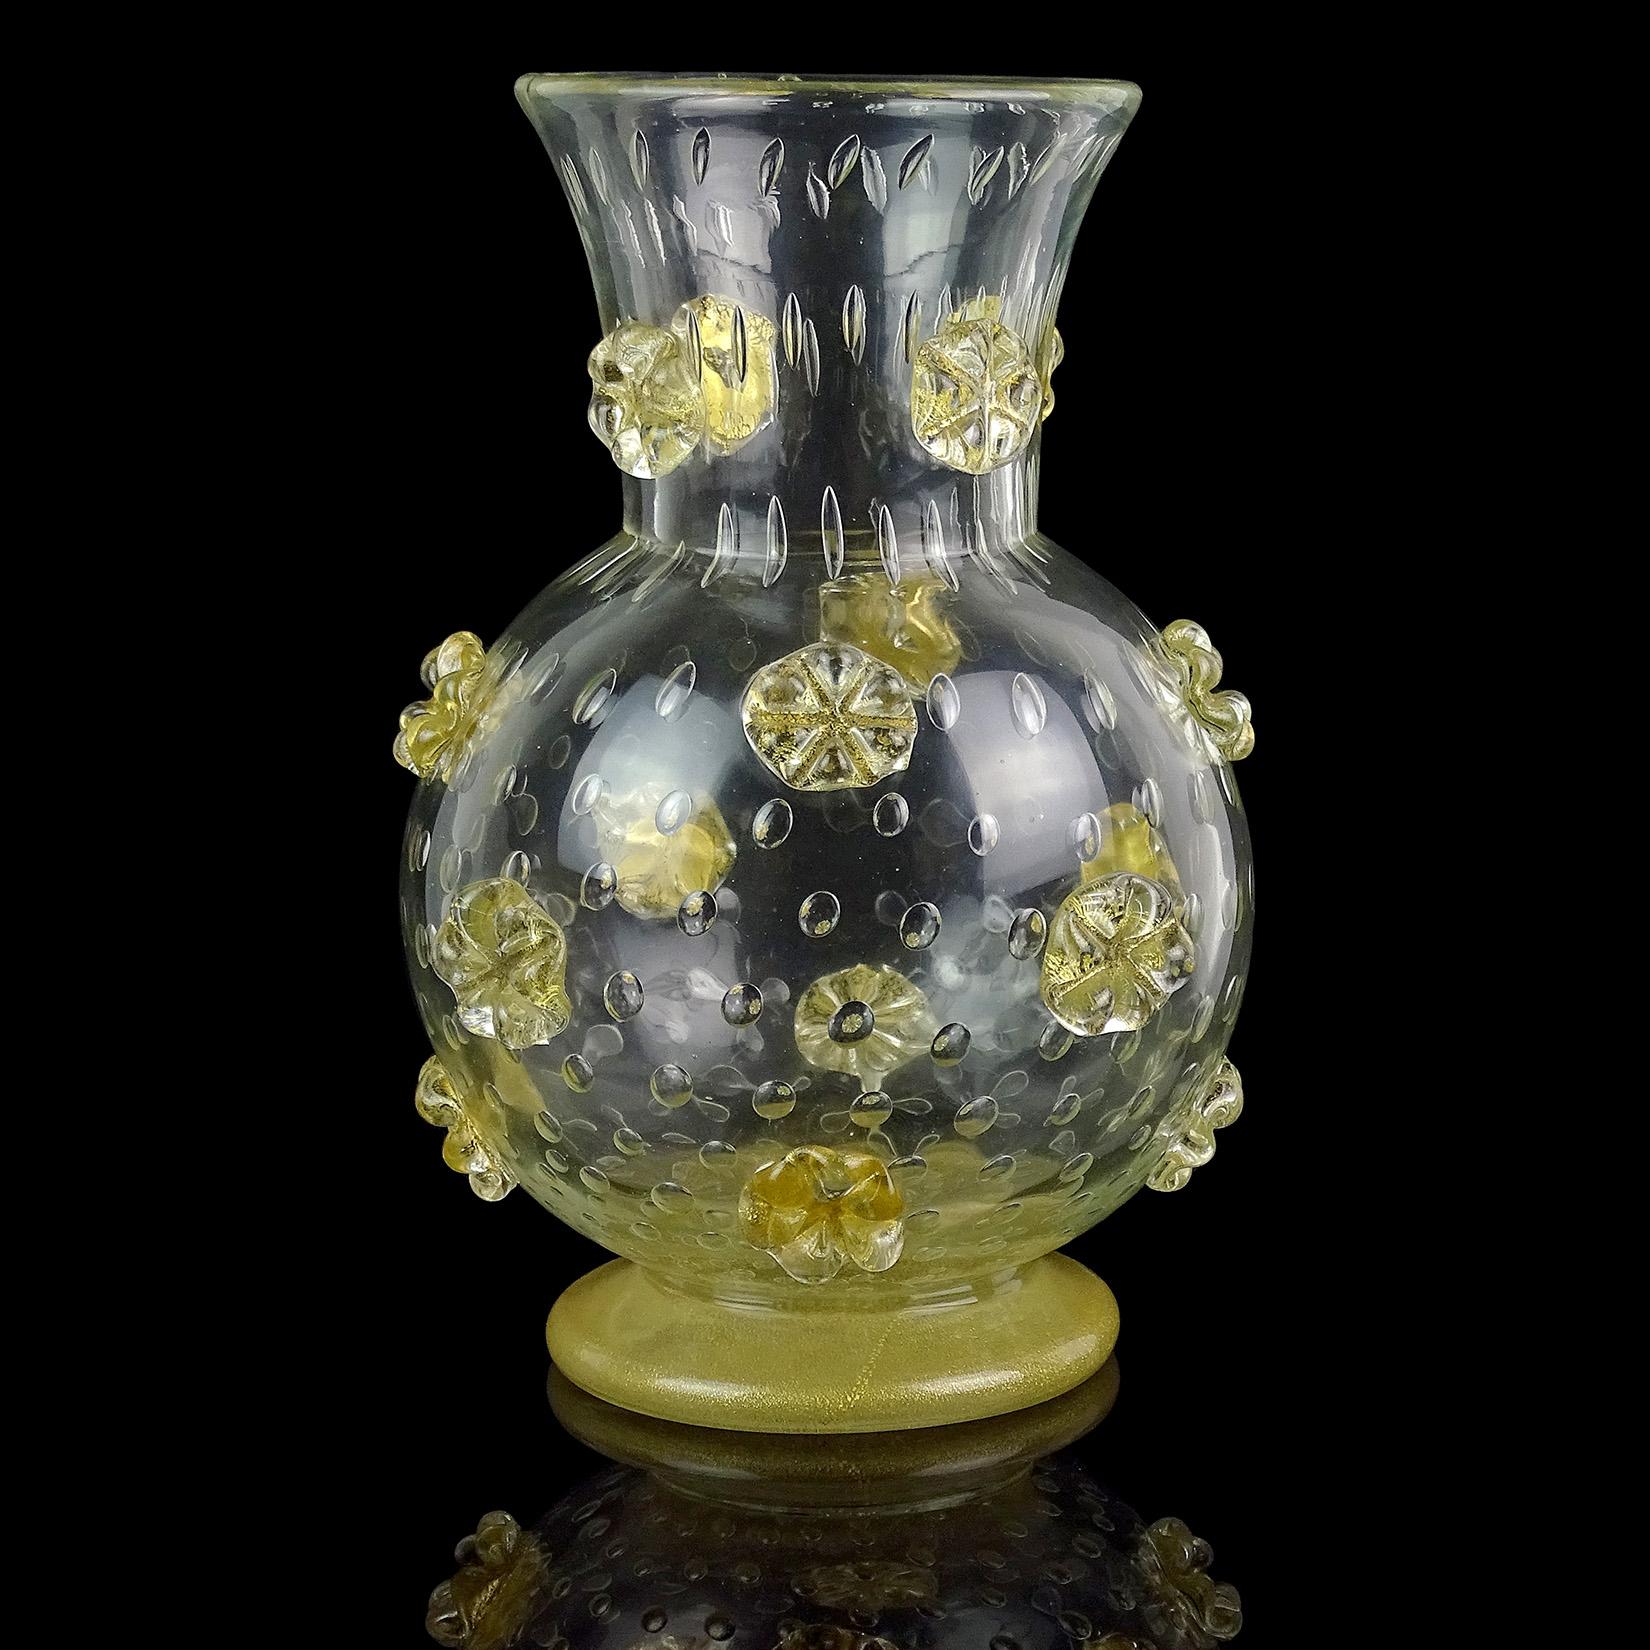 Very rare and beautiful, vintage Murano hand blown controlled bubbles with applied gold leaf stars Italian art glass vase. Documented to designer Ercole Barovier, for Barovier e Toso, circa 1942. From the published 